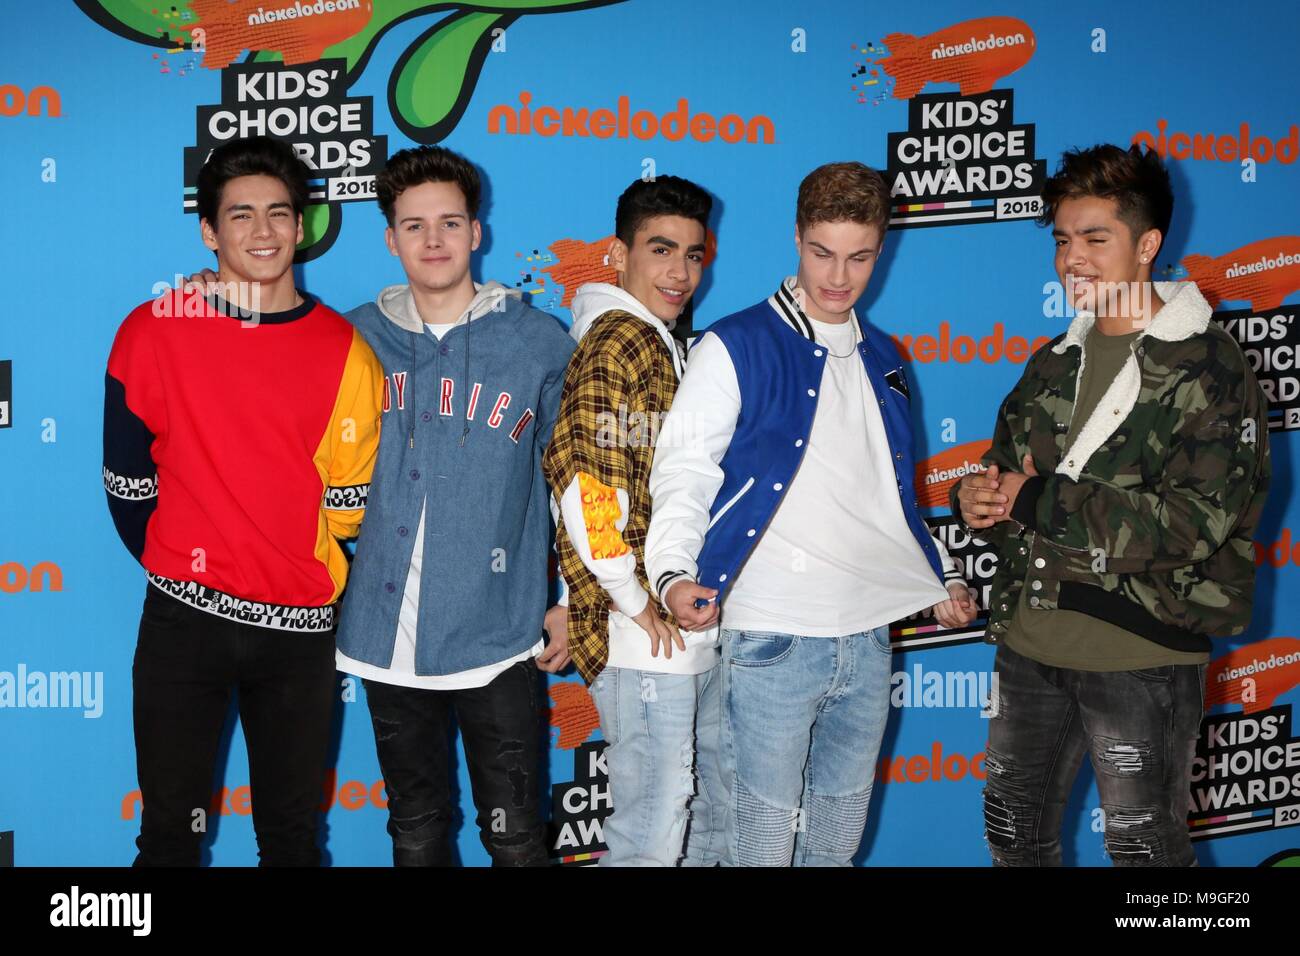 Chance Perez, Michael Conor, Drew Ramos, Sergio Calderon, Brady Tutton at arrivals for Nickelodeon's 2018 Kids' Choice Awards - Part 2, The Forum, Inglewood, CA March 24, 2018. Photo By: Priscilla Grant/Everett Collection Stock Photo